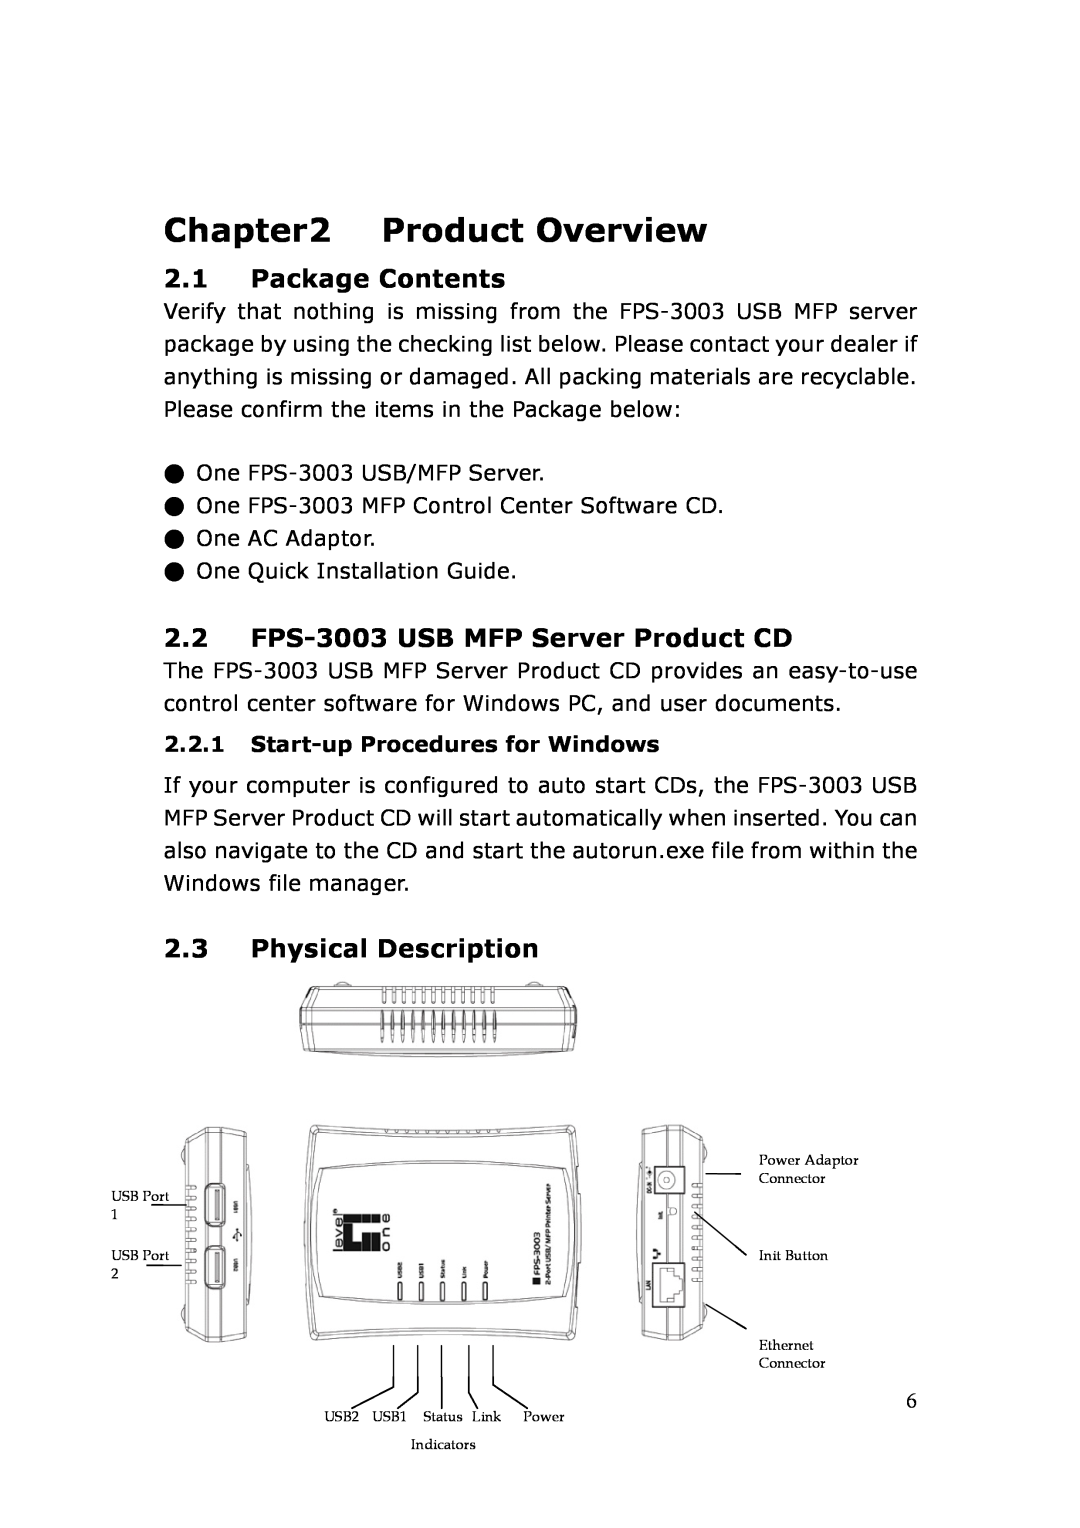 LevelOne user manual Product Overview, Package Contents, FPS-3003 USB MFP Server Product CD, Physical Description 